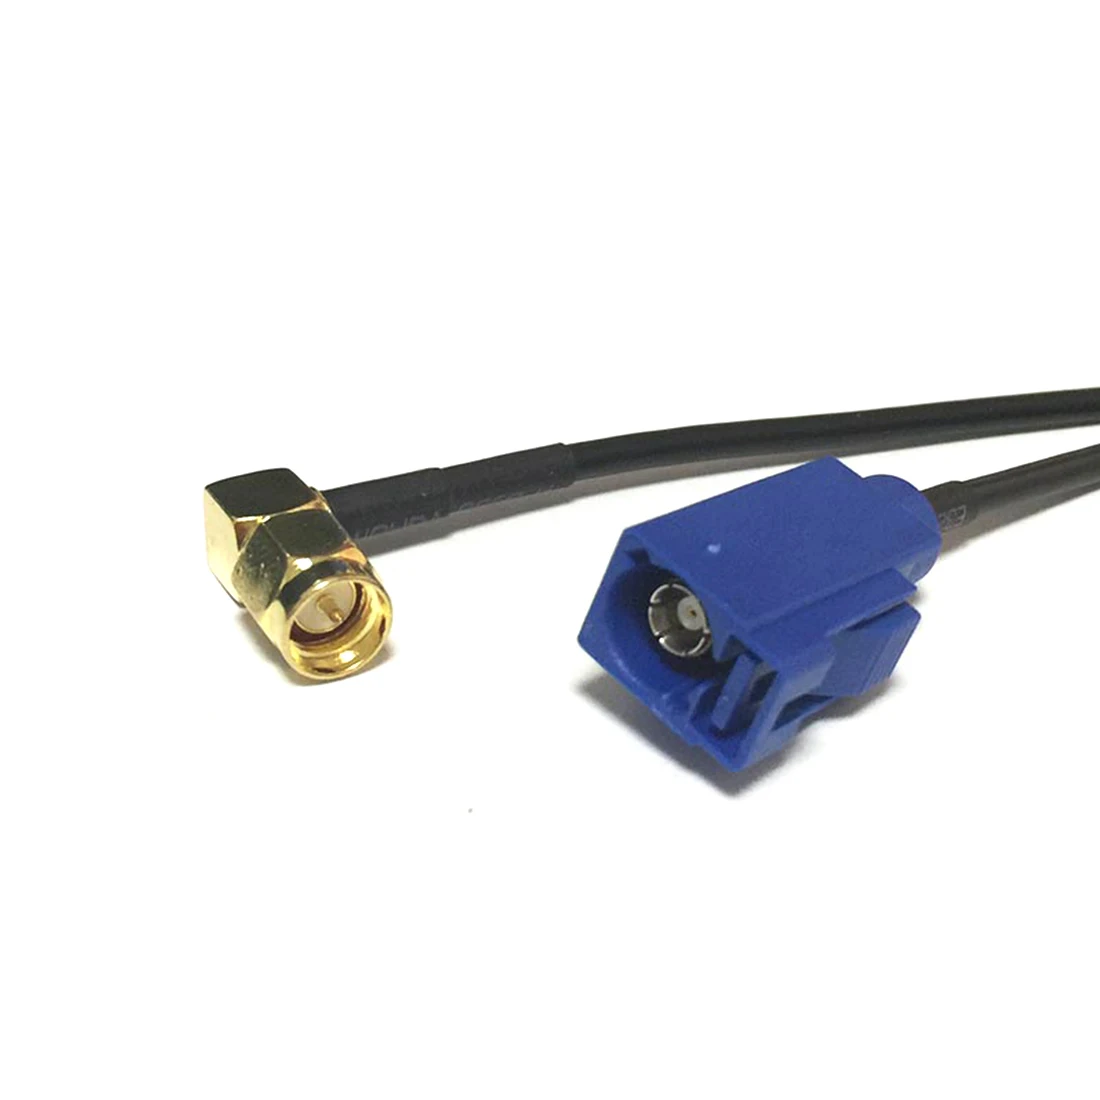 

New Modem Coaxial Cable SMA Male Plug Right Angle Switch FAKRA Connector RG174 Cable Pigtail 20CM 8" Adapter RF Jumper